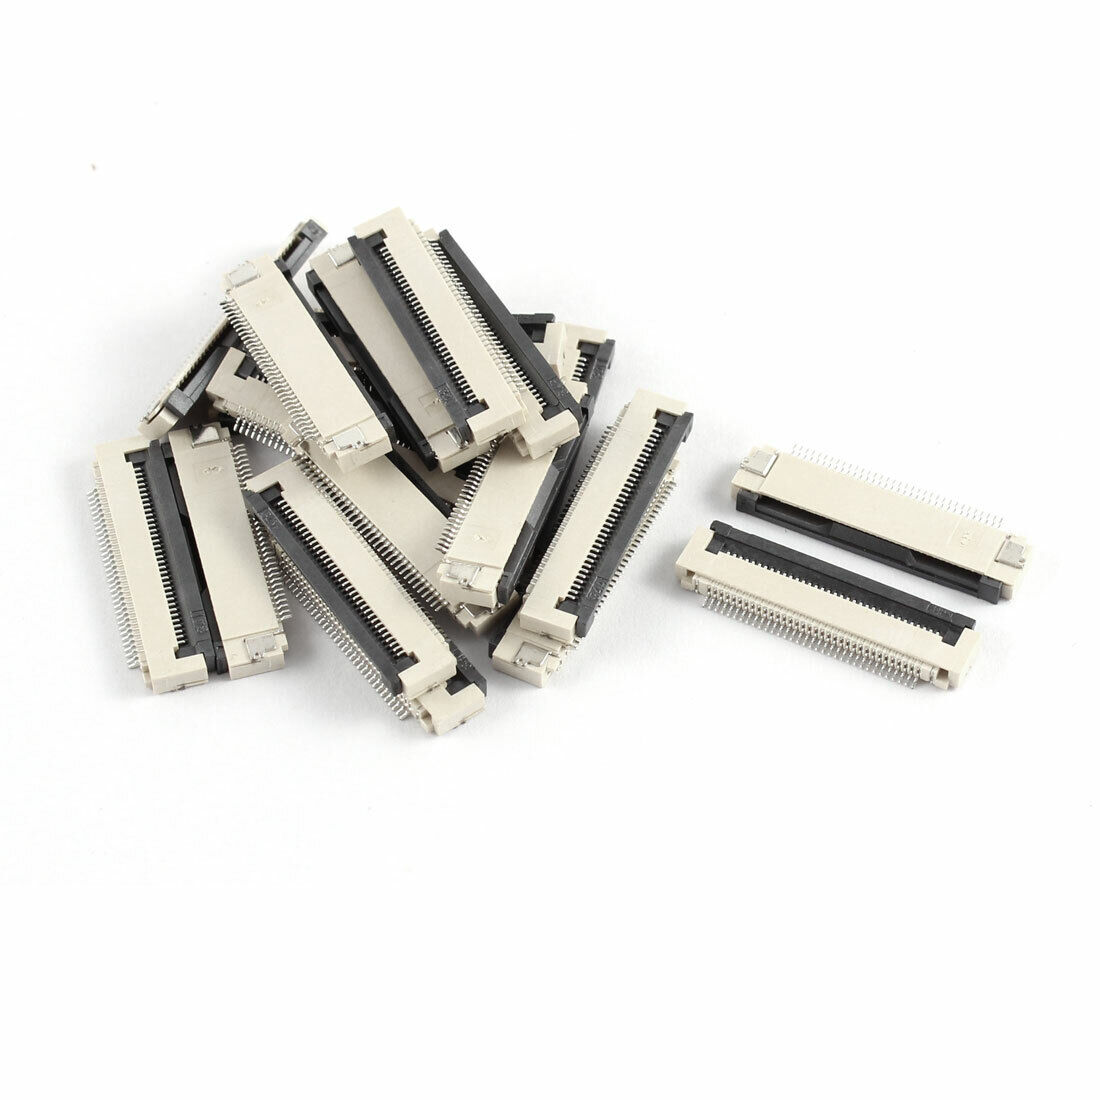 20Pcs Clamshell Type Bottom Port 34Pin 0.5mm Pitch FFC FPC Sockets Connector